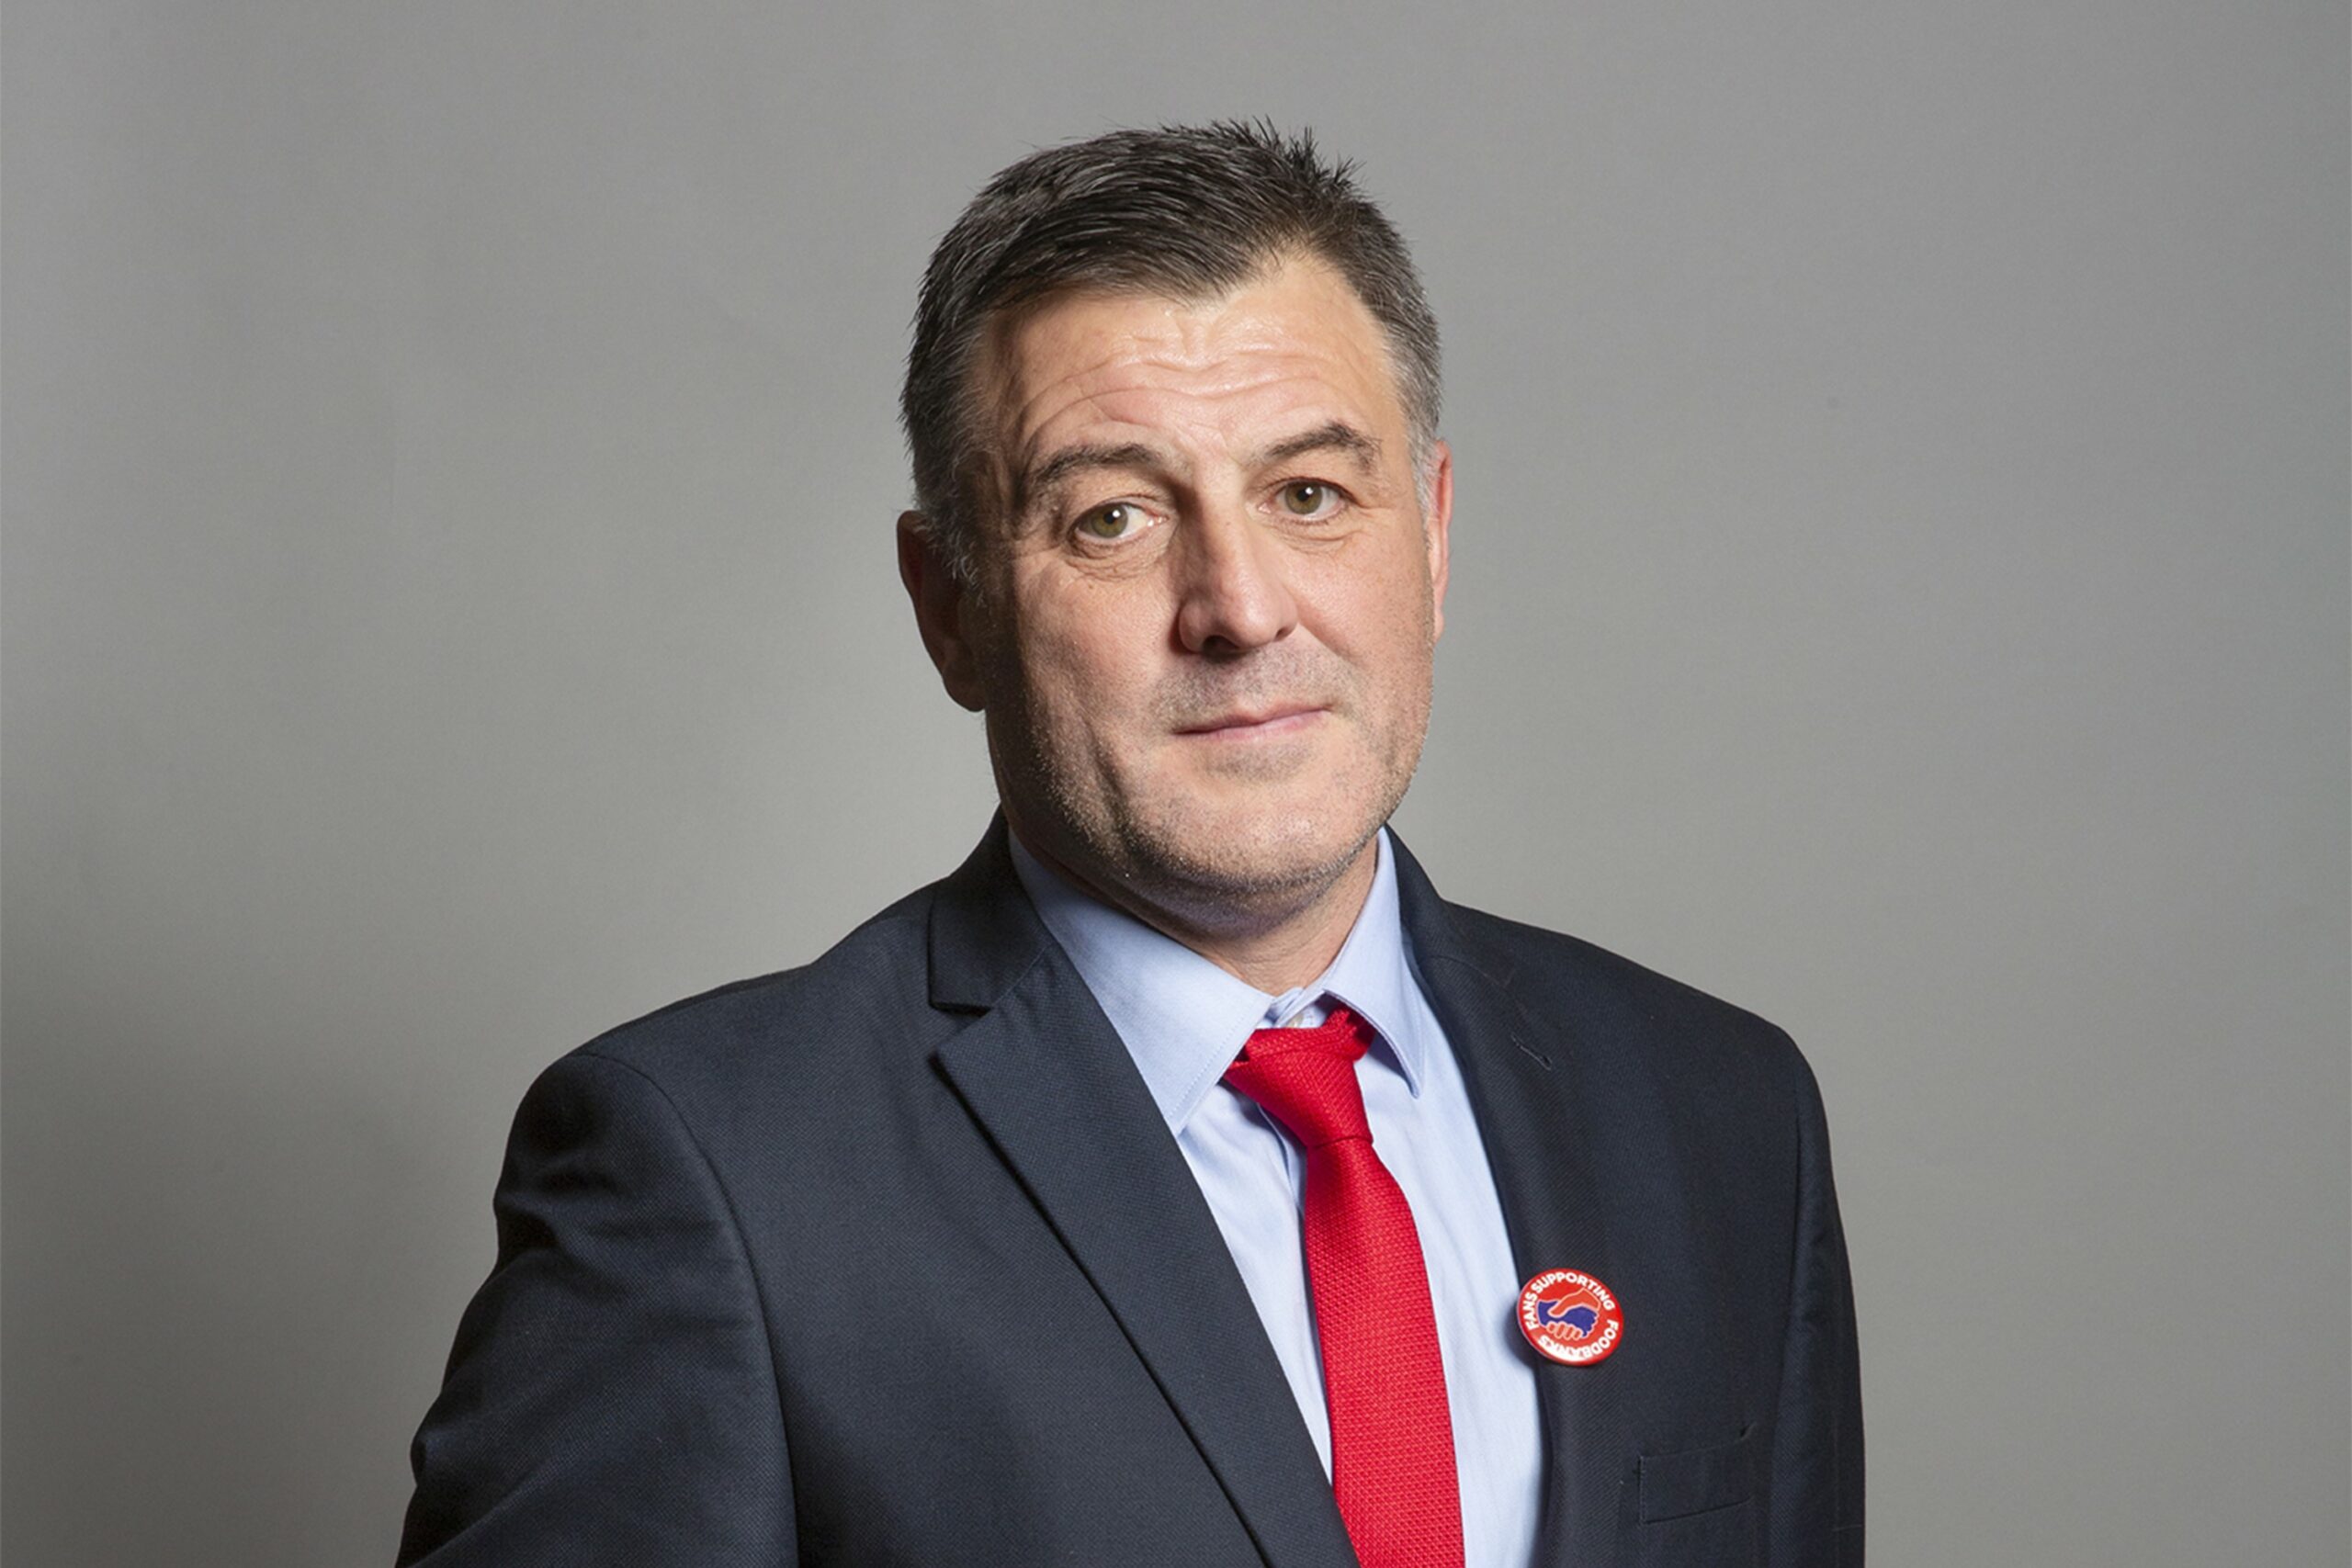 Ian Byrne MP for Liverpool West Derby